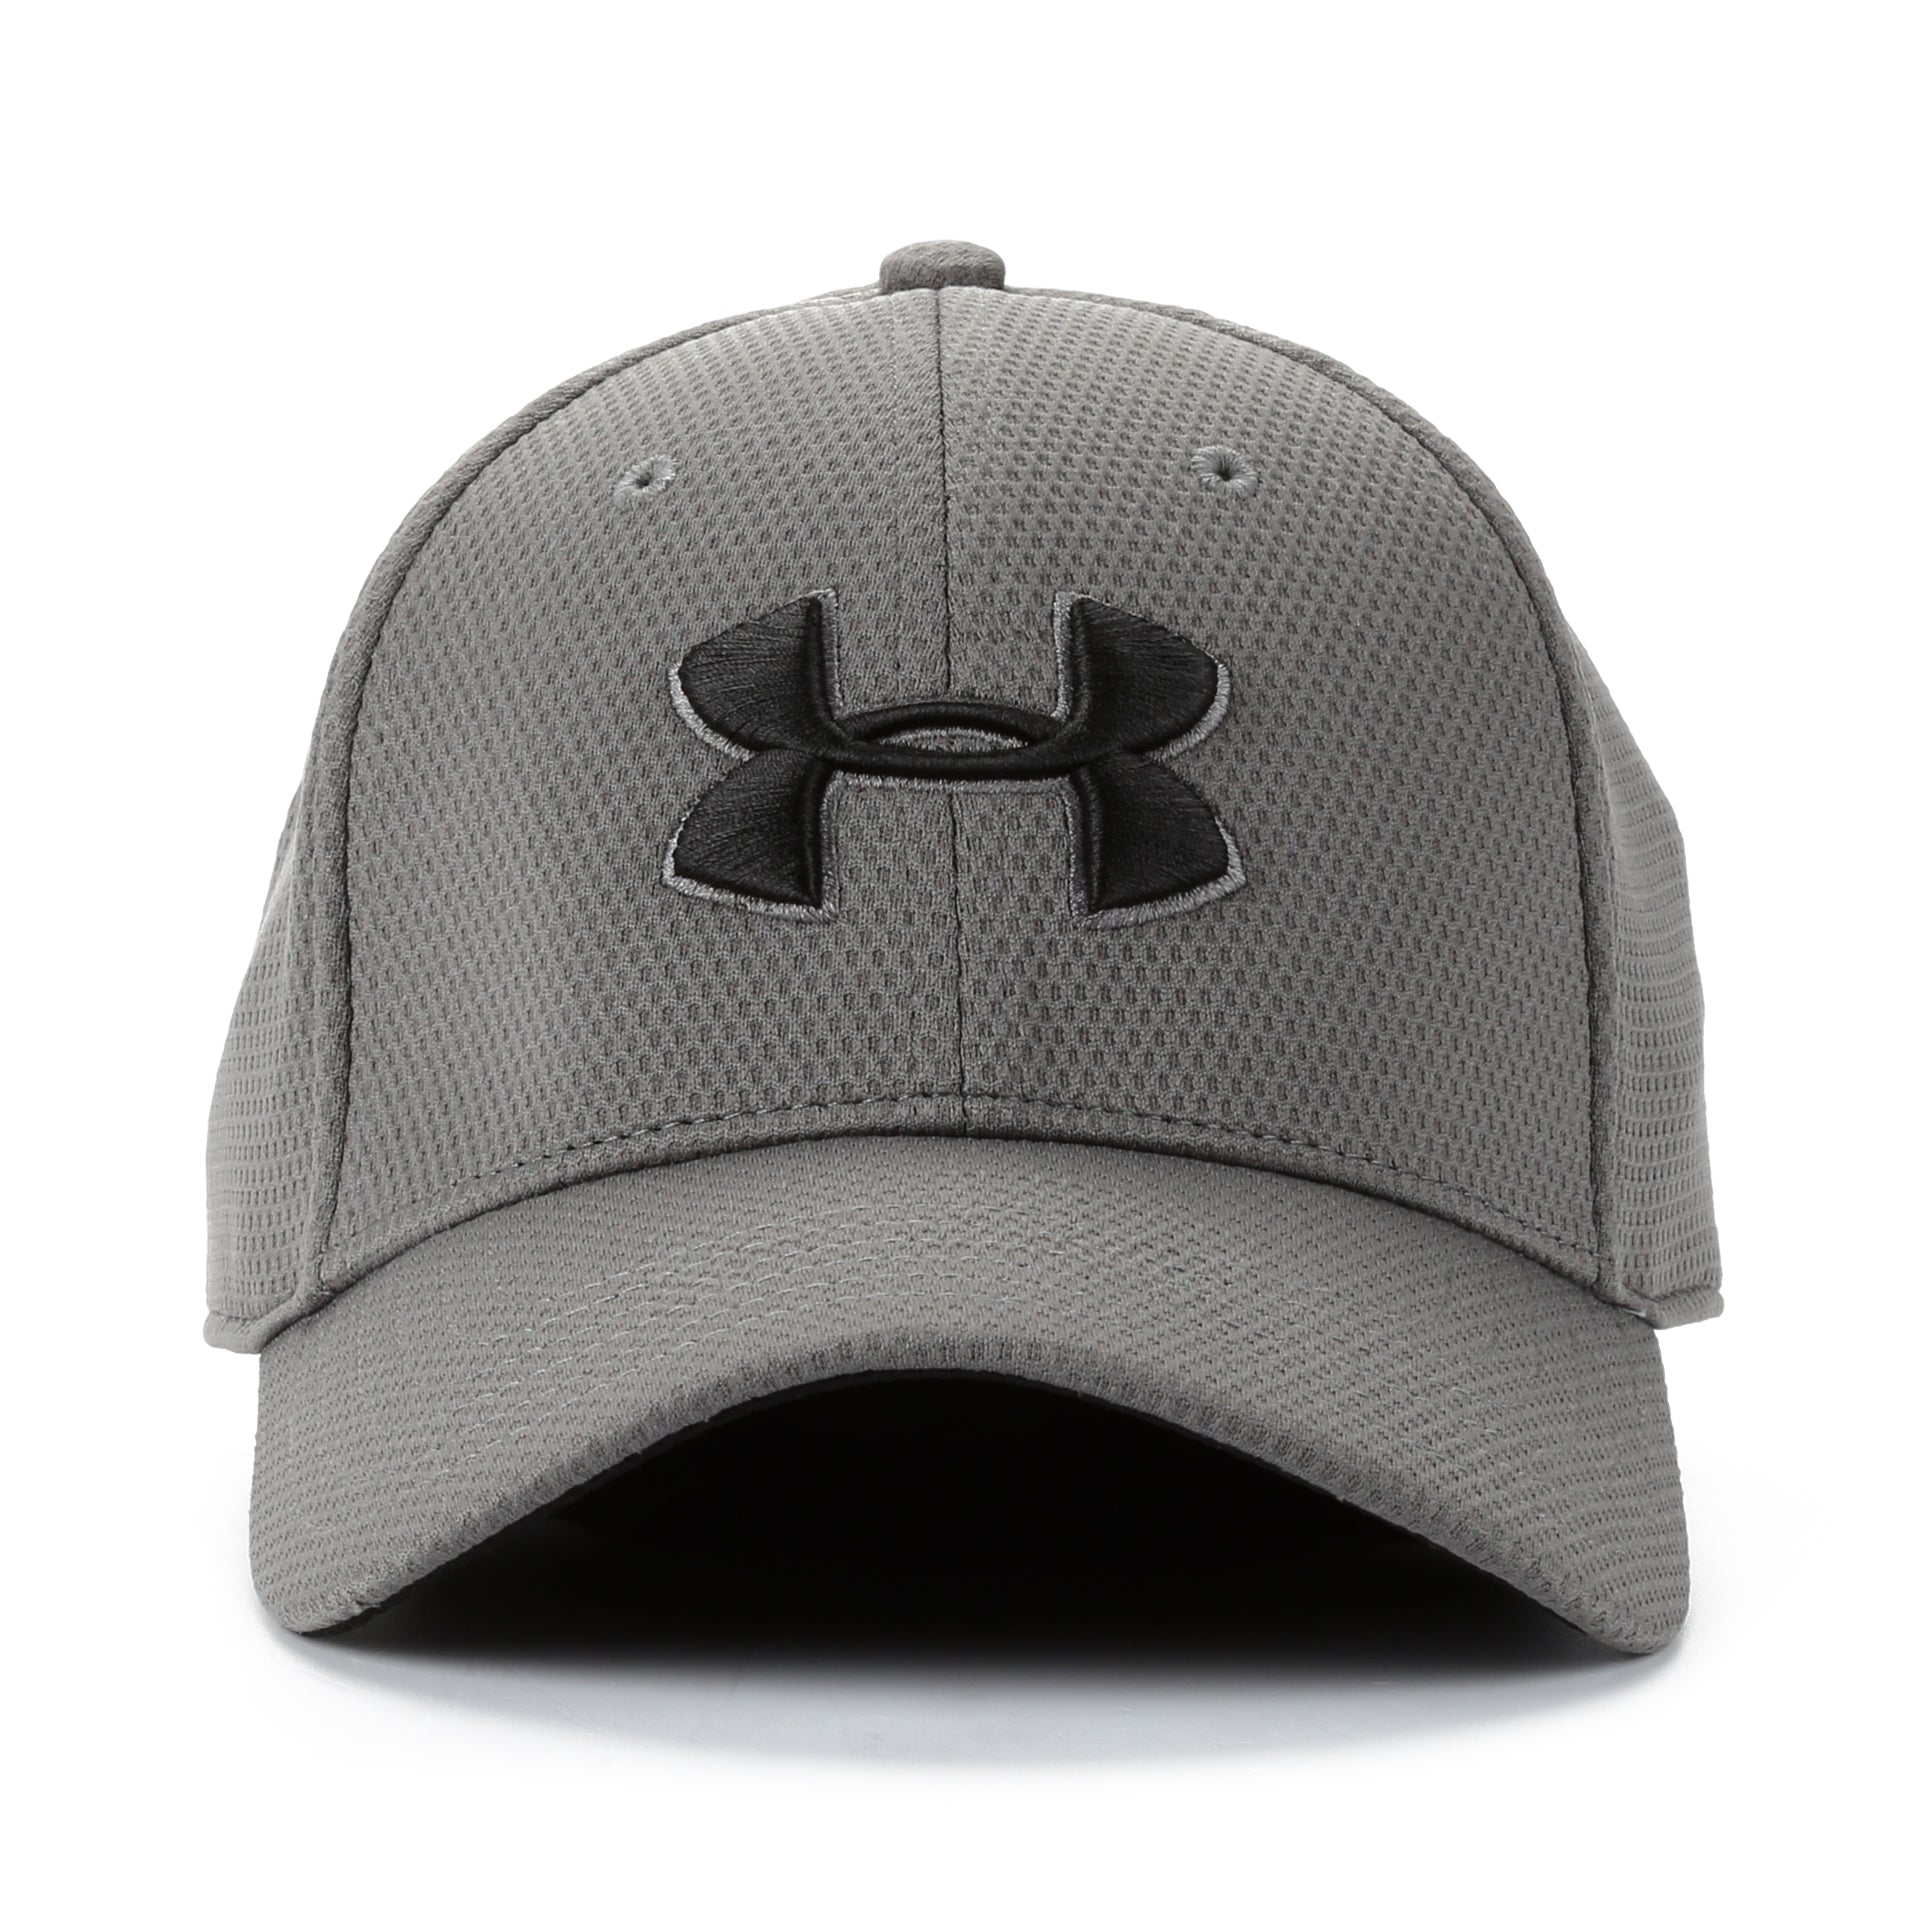 Under Armour Blitzing II Stretch Fit Hat - Graphite - New Star